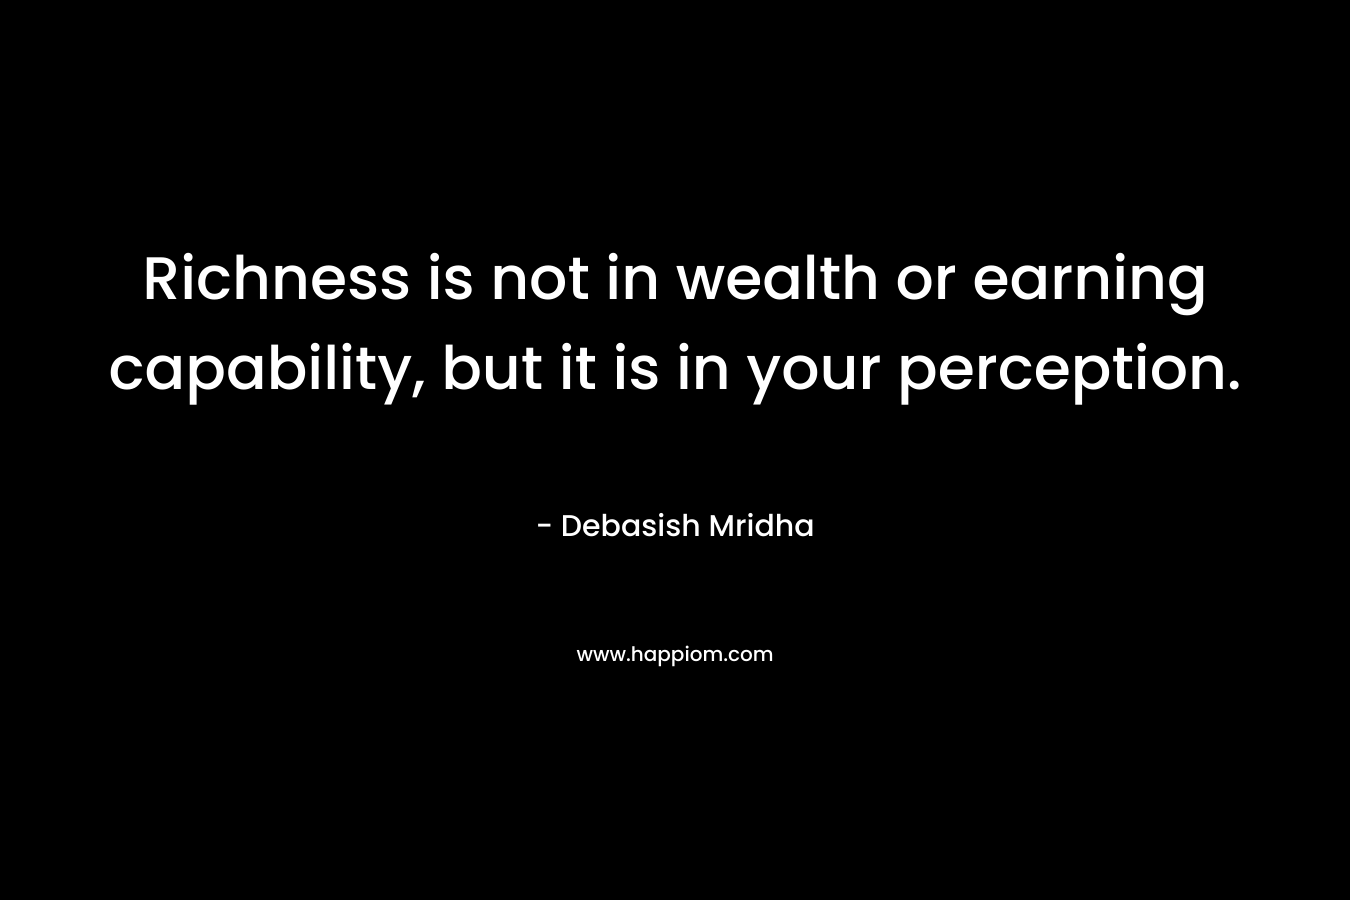 Richness is not in wealth or earning capability, but it is in your perception. – Debasish Mridha